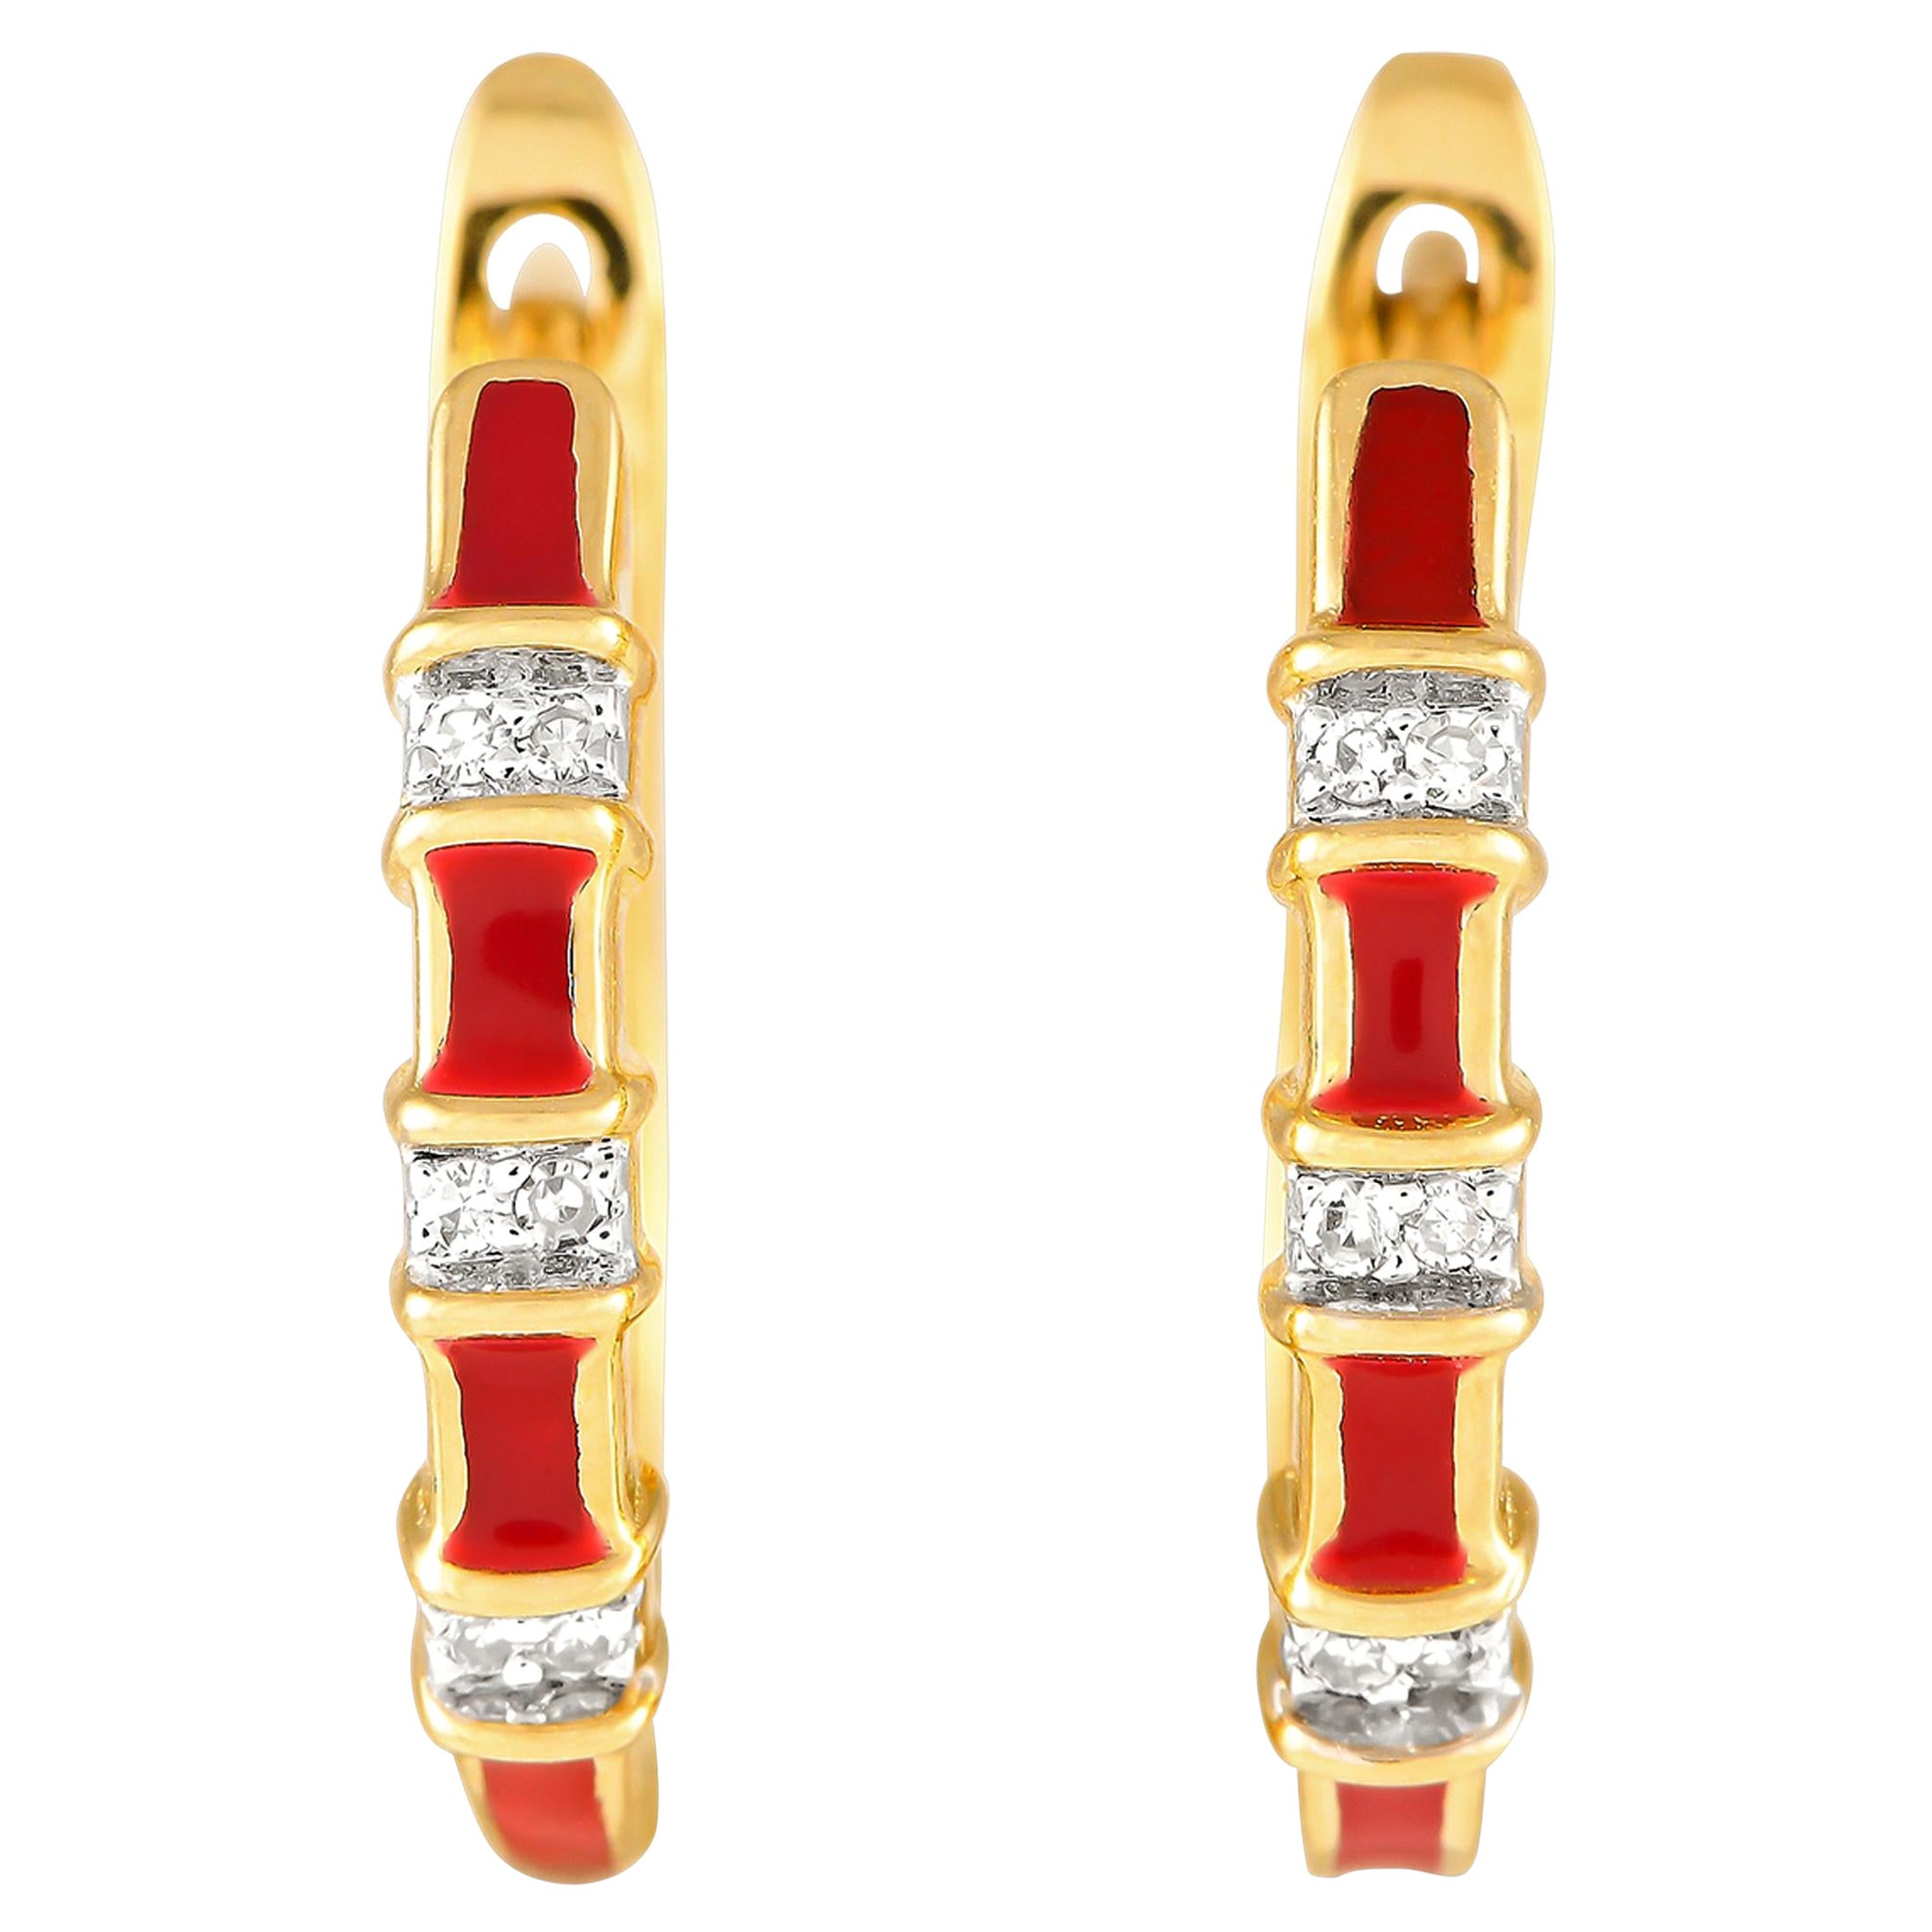 LB Exclusive 14K Yellow Gold 0.05ct Diamond and Red Enamel Earrings ER28196 For Sale